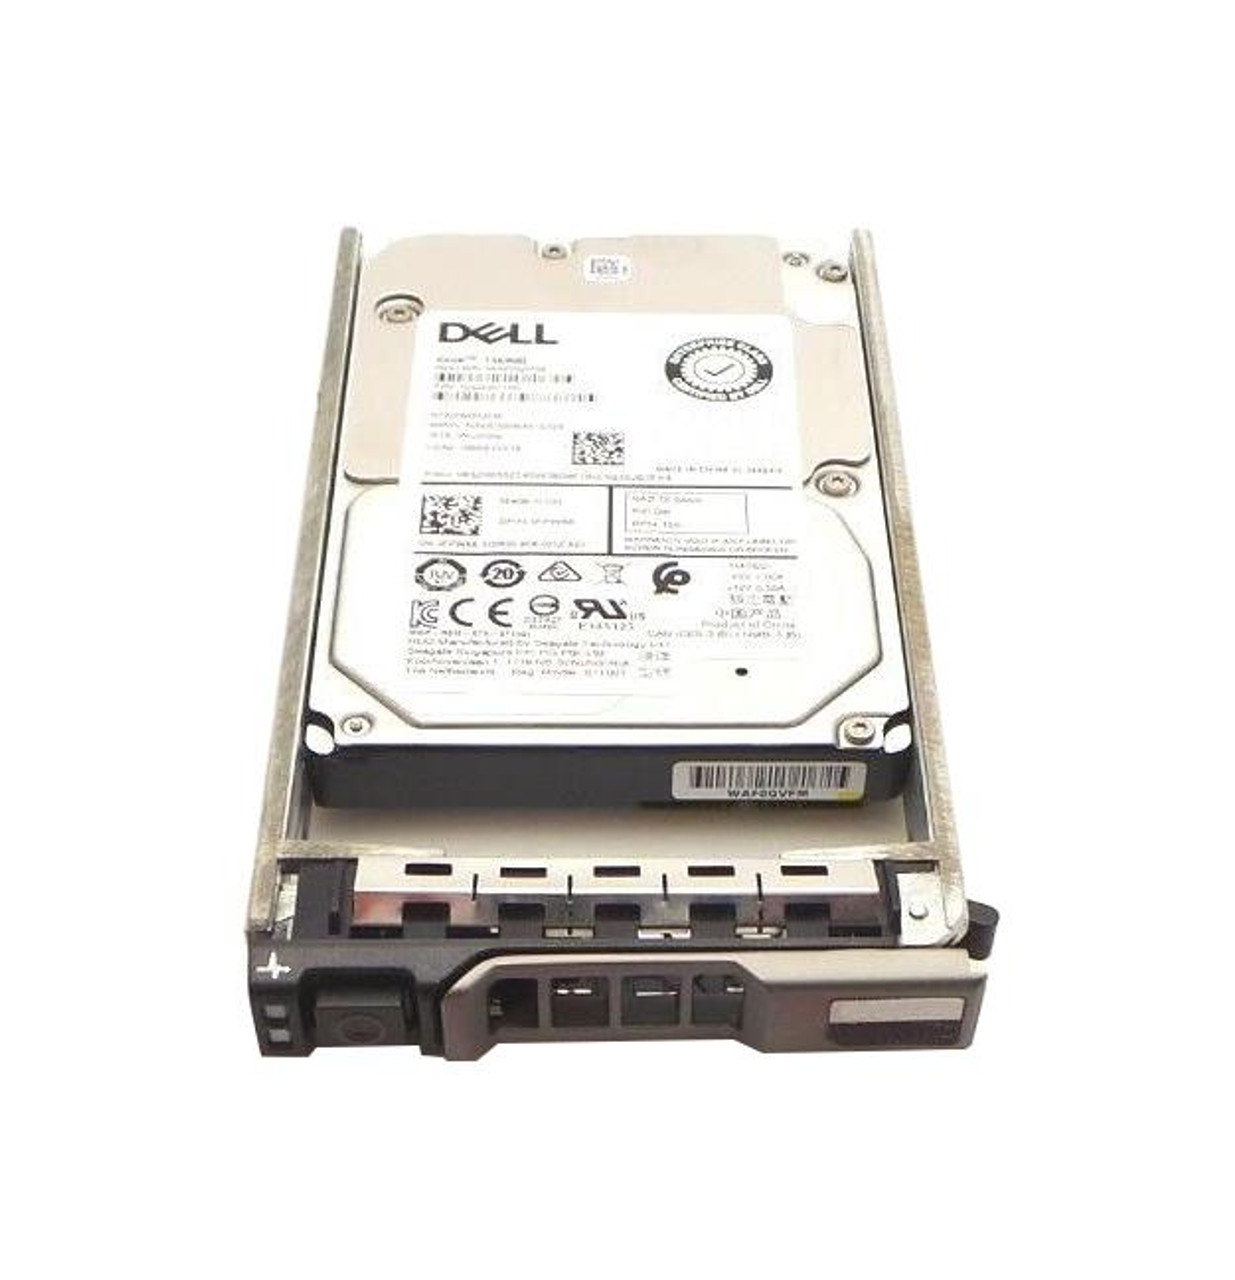 036YG1 Dell 2.4TB 10000RPM SAS 12Gbps Hot Swap 256MB Cache (512e) 2.5-inch Internal Hard Drive with Tray